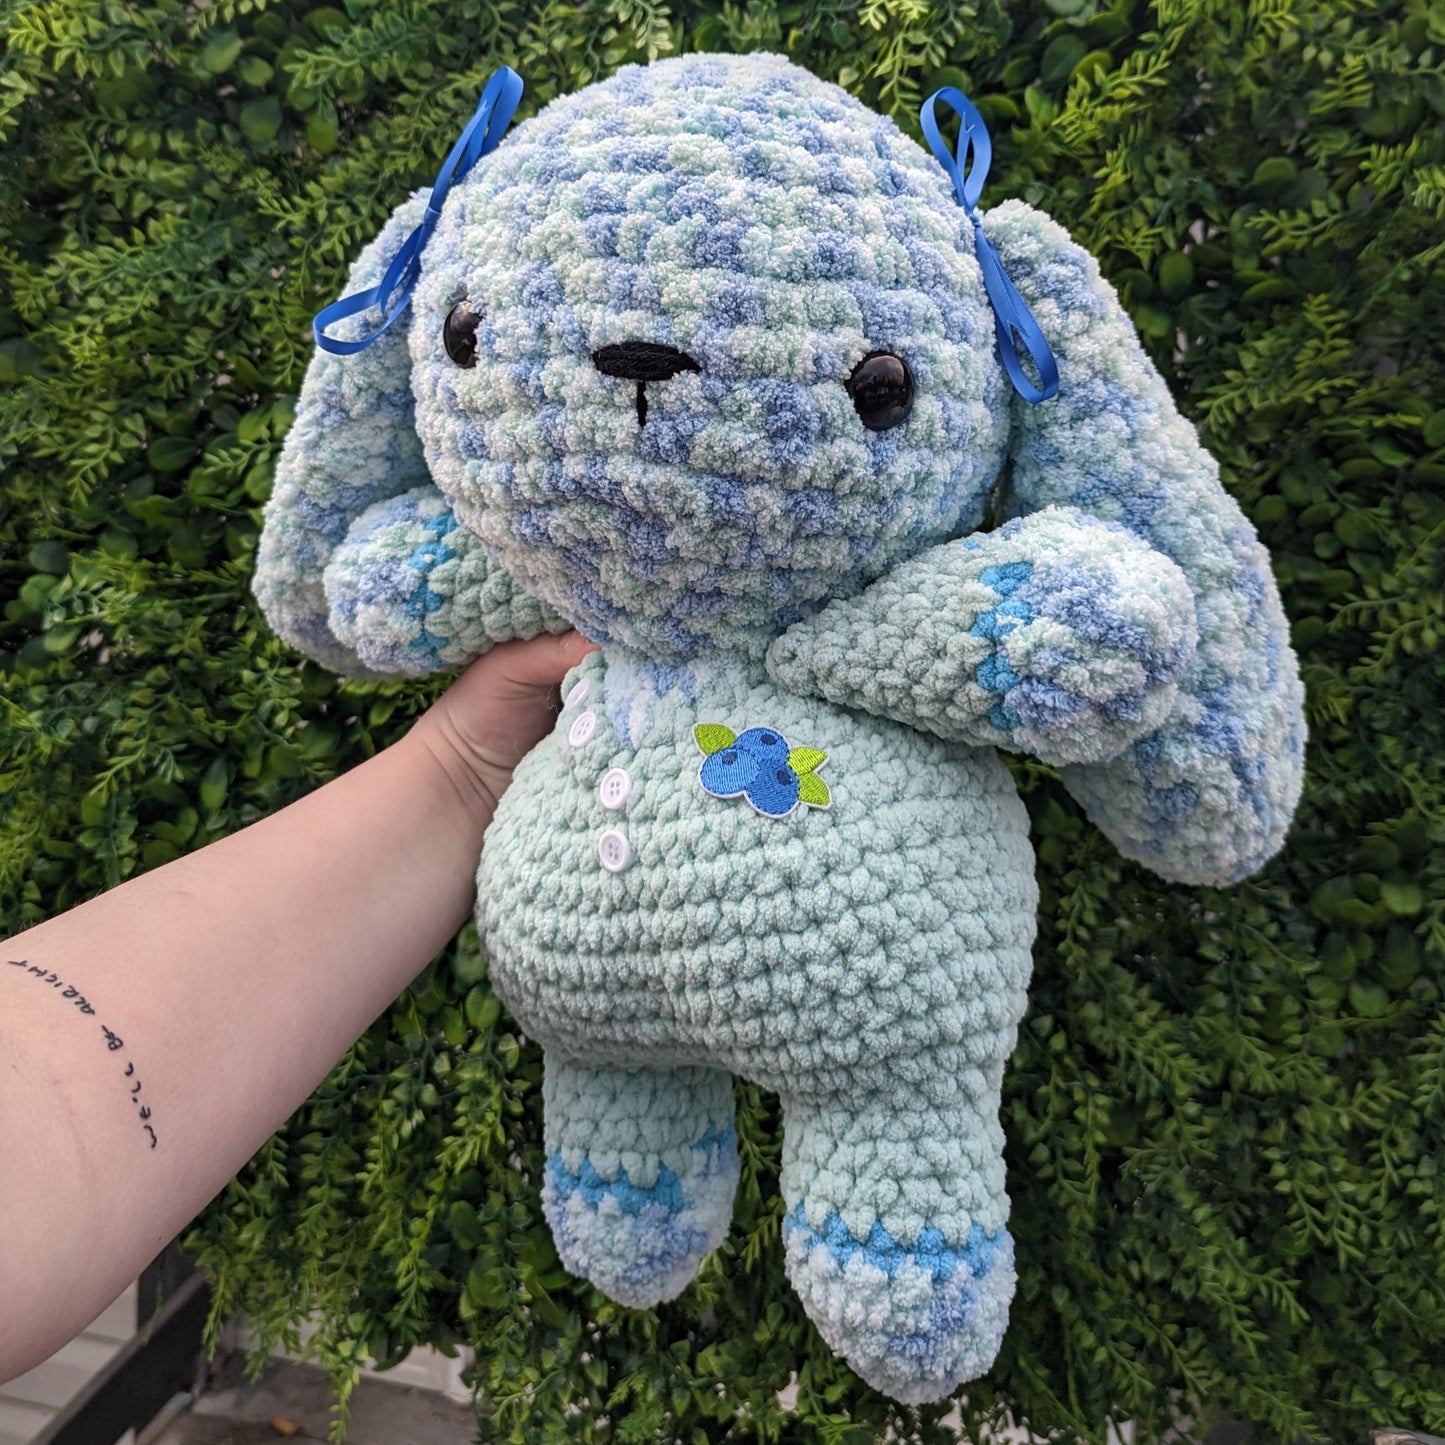 Jumbo Fuzzy Blueberry Bunny in Onesie Crochet Plushie [Archived]